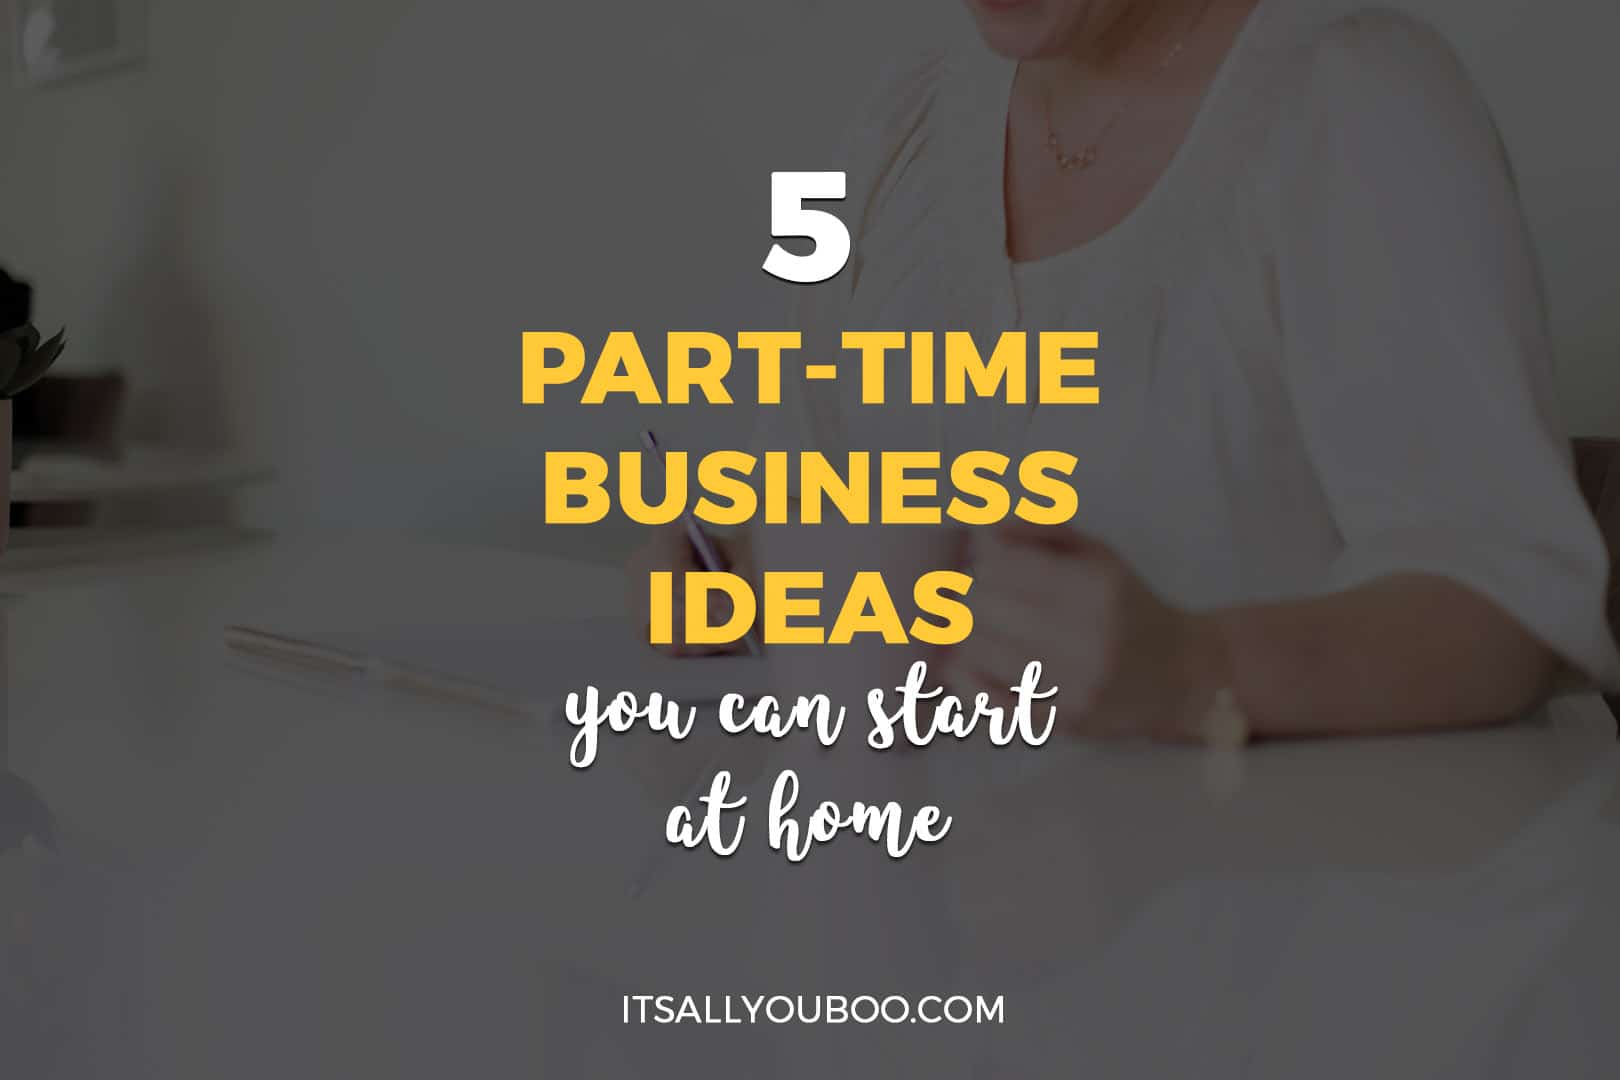 5 Part-Time Business Ideas You Can Start At Home